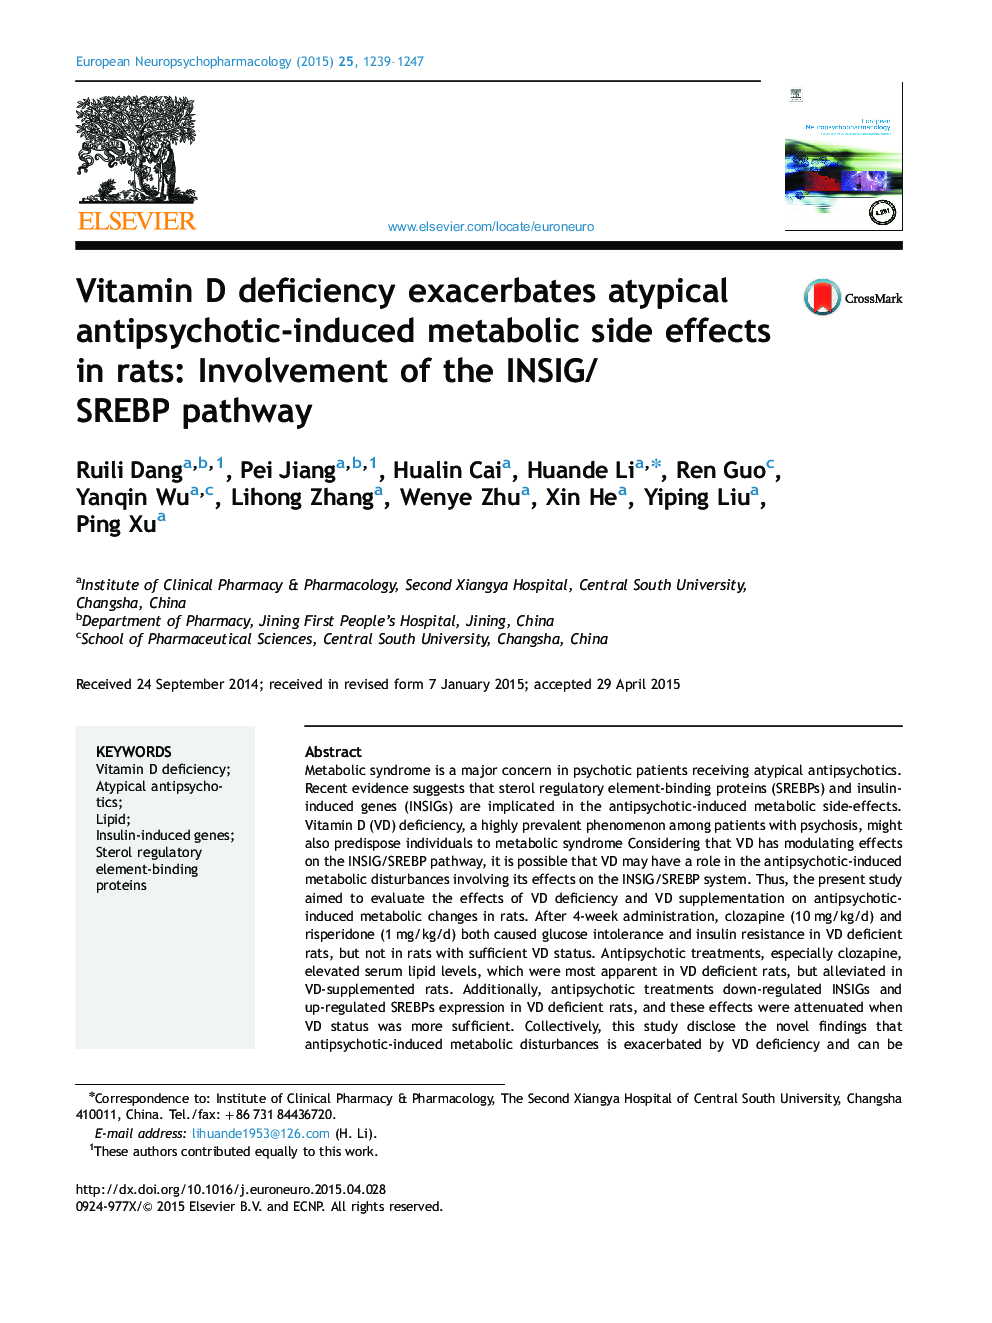 Vitamin D deficiency exacerbates atypical antipsychotic-induced metabolic side effects in rats: Involvement of the INSIG/SREBP pathway